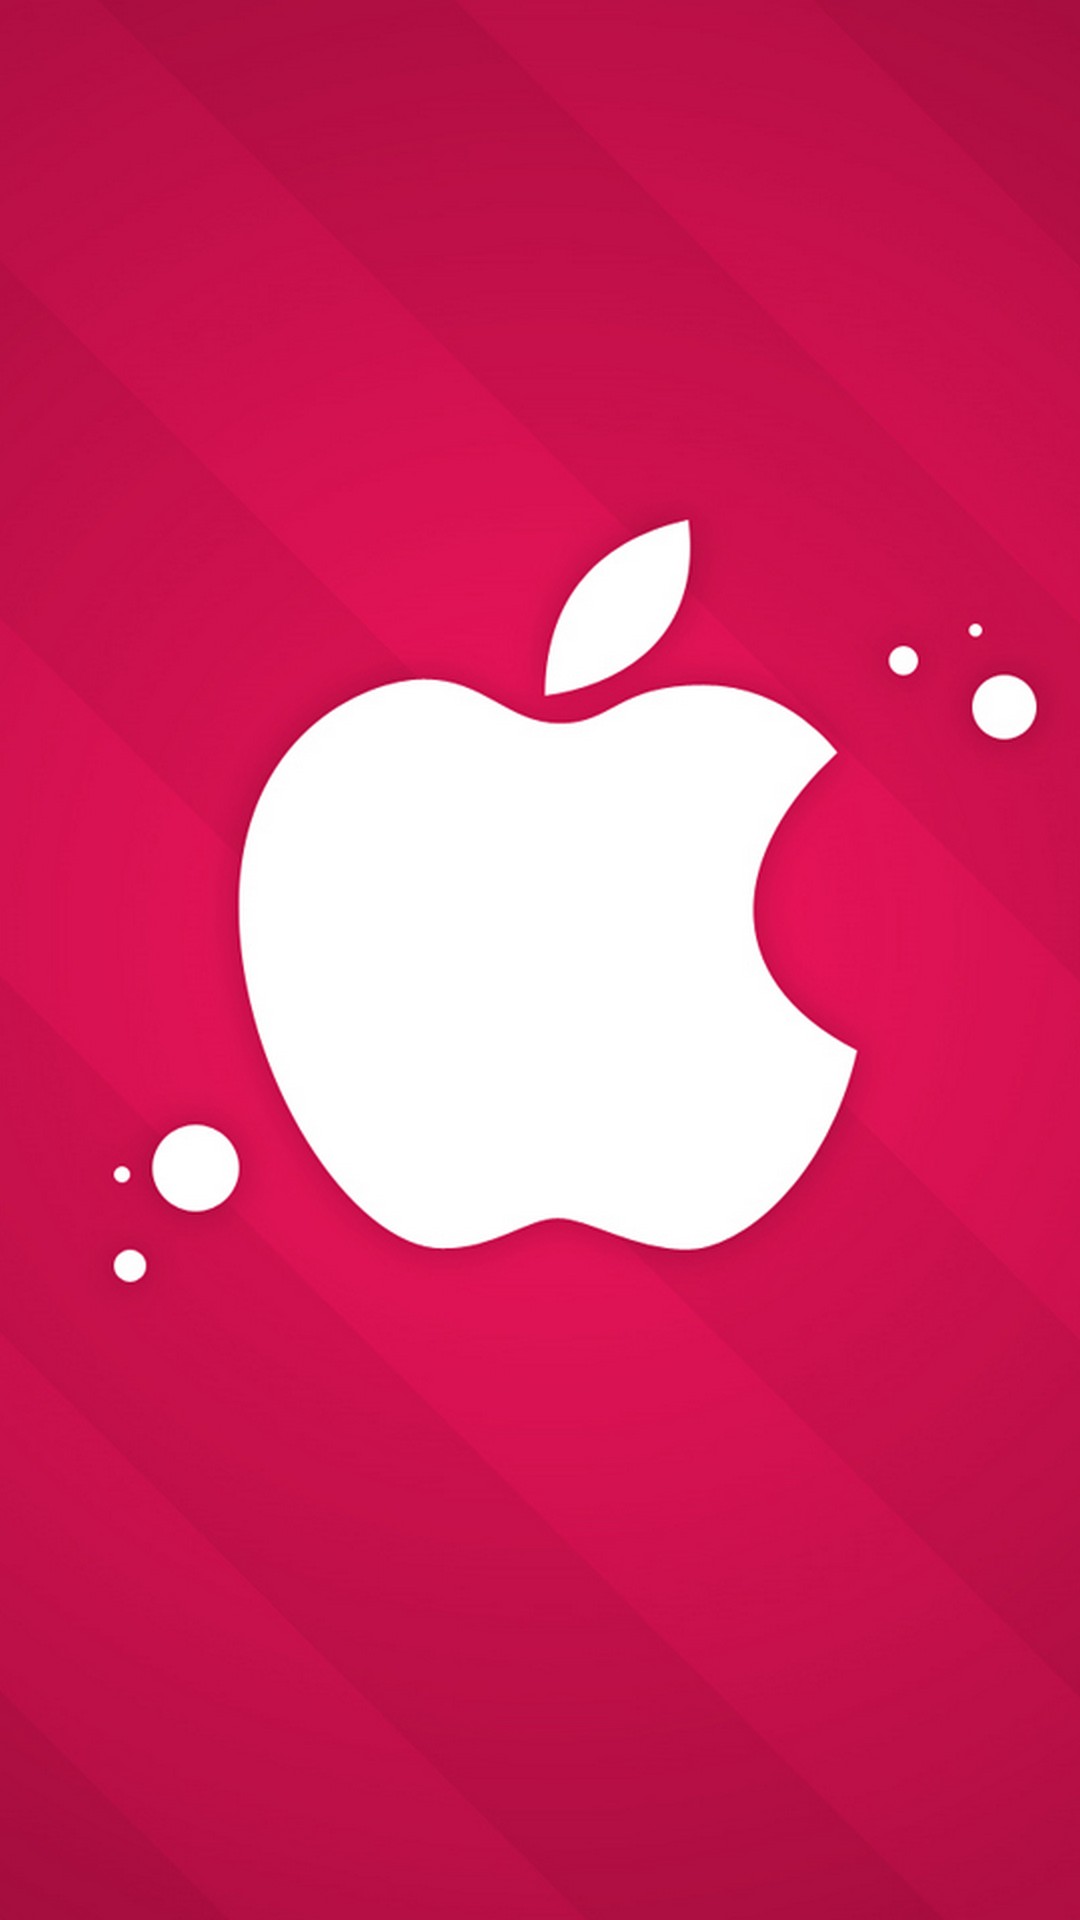 Apple Girly Wallpaper For Android Phones | 2021 Cute ...